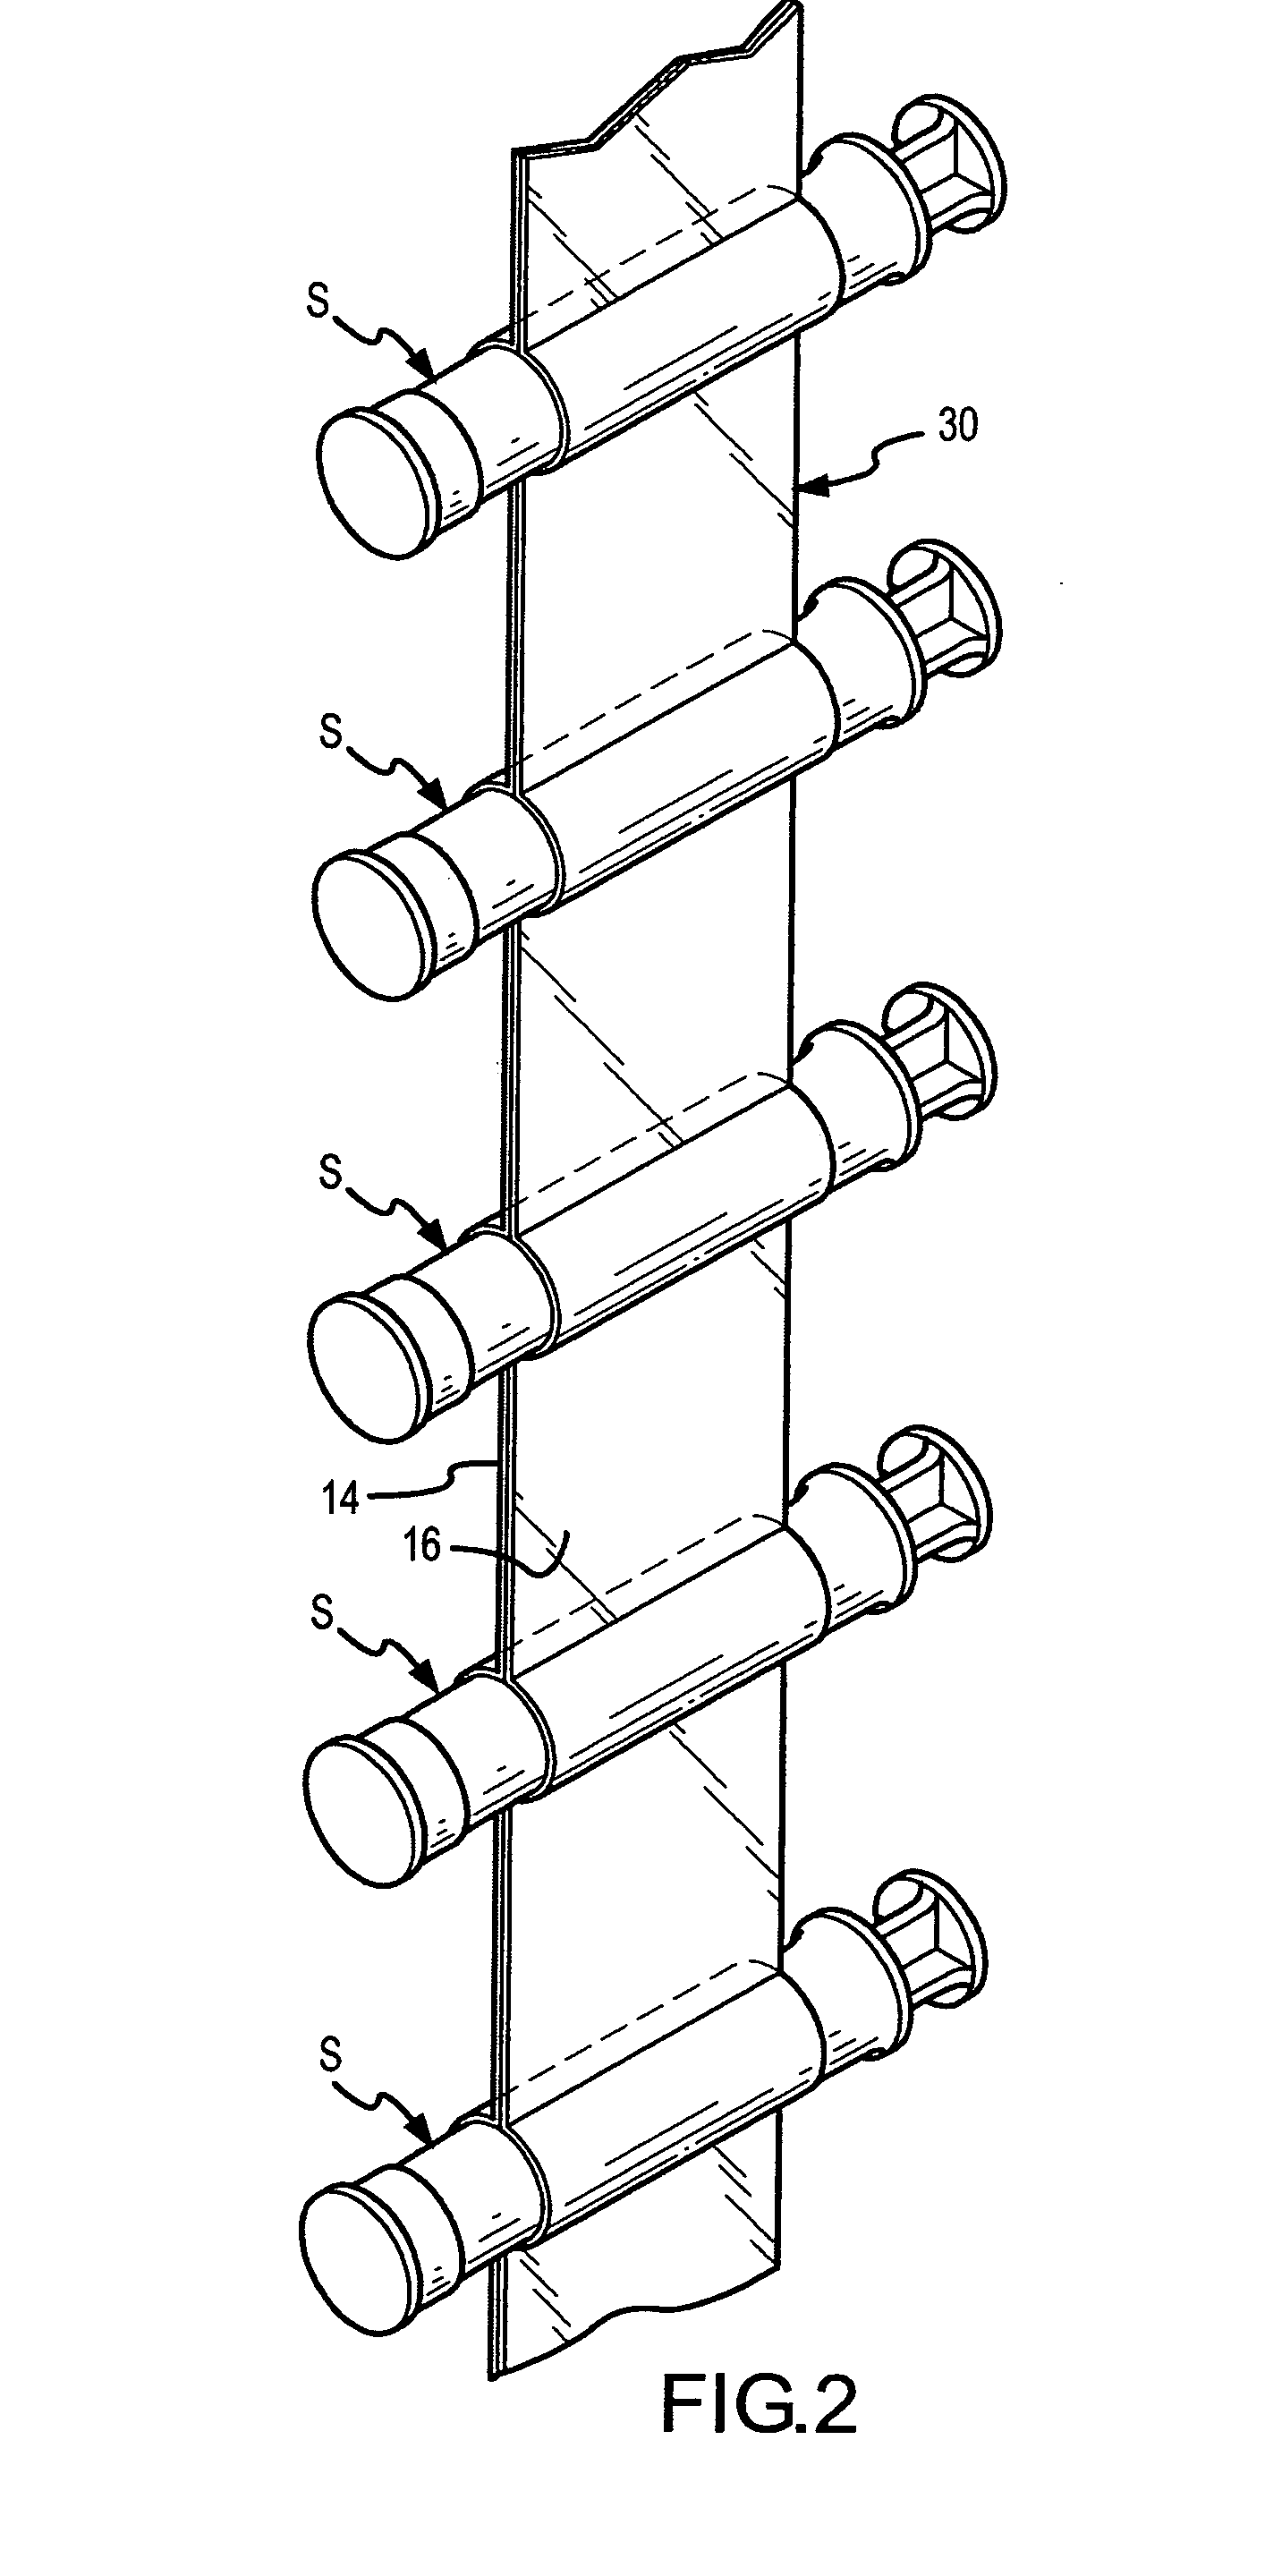 Method, system, and apparatus for handling, labeling, filling, and capping syringes with improved cap